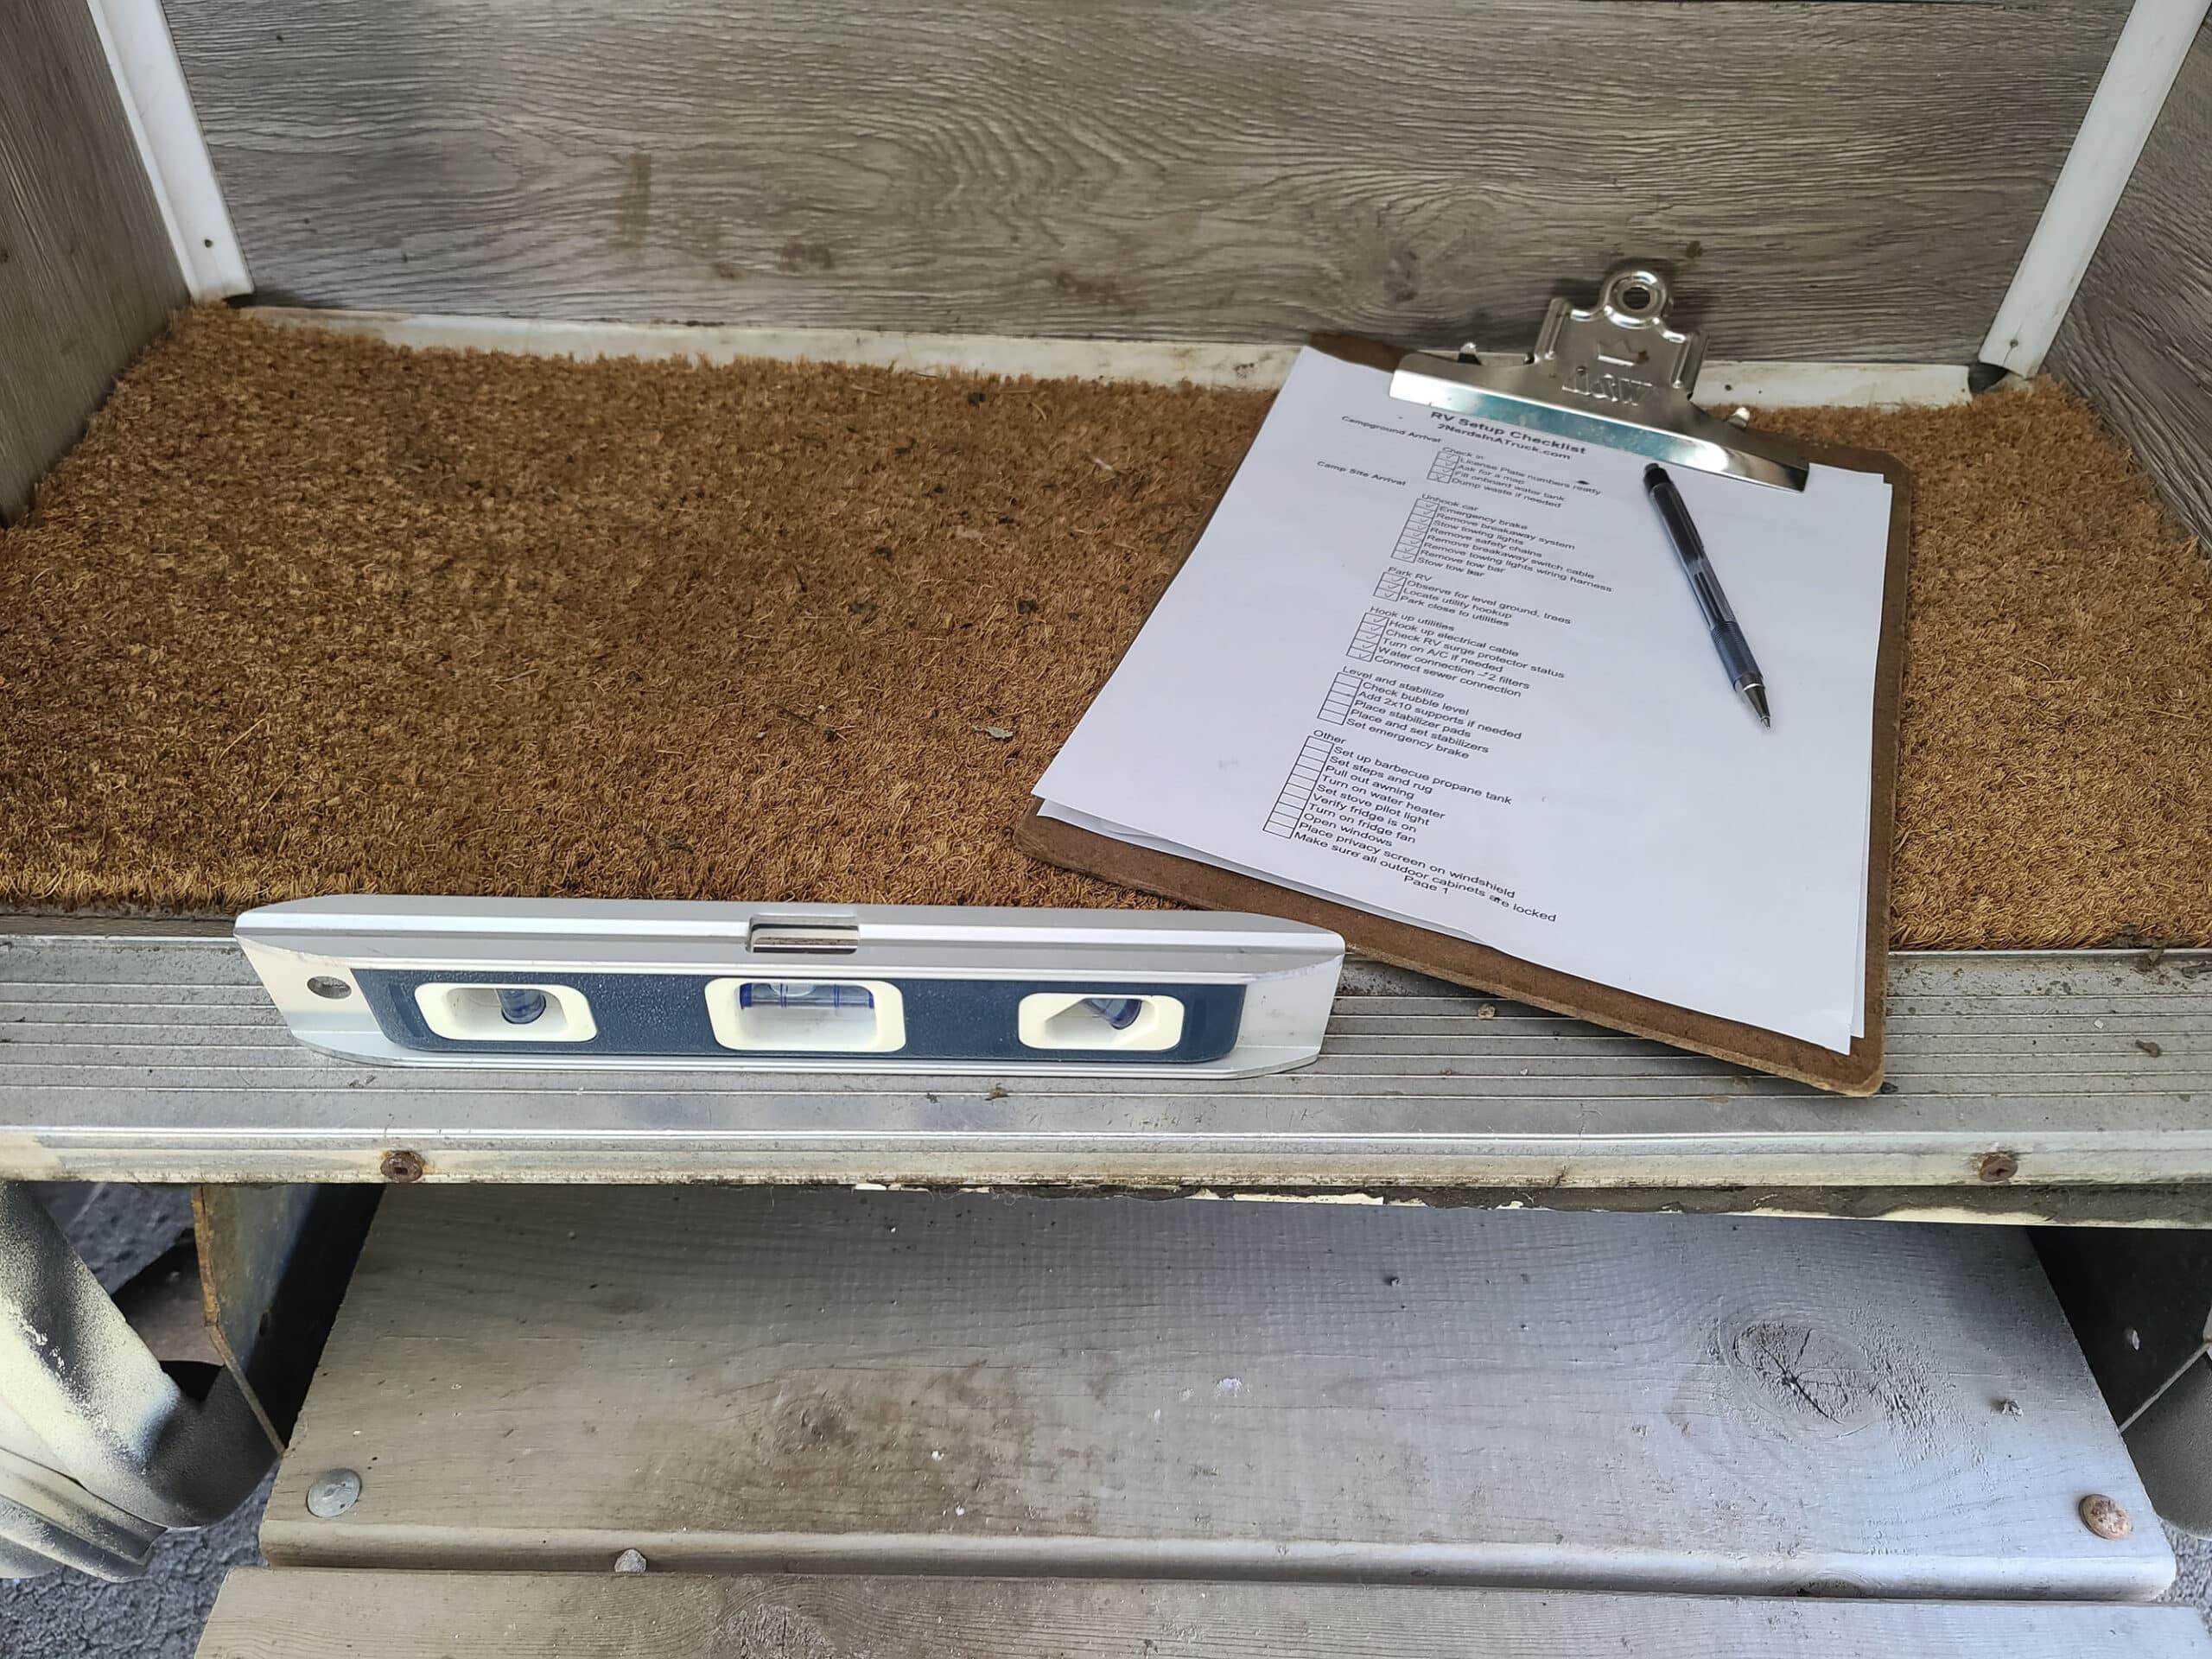 A clipboard with a paper checklist and pen, sitting on a step of an RV.  There is a small level on the floor of the RV.